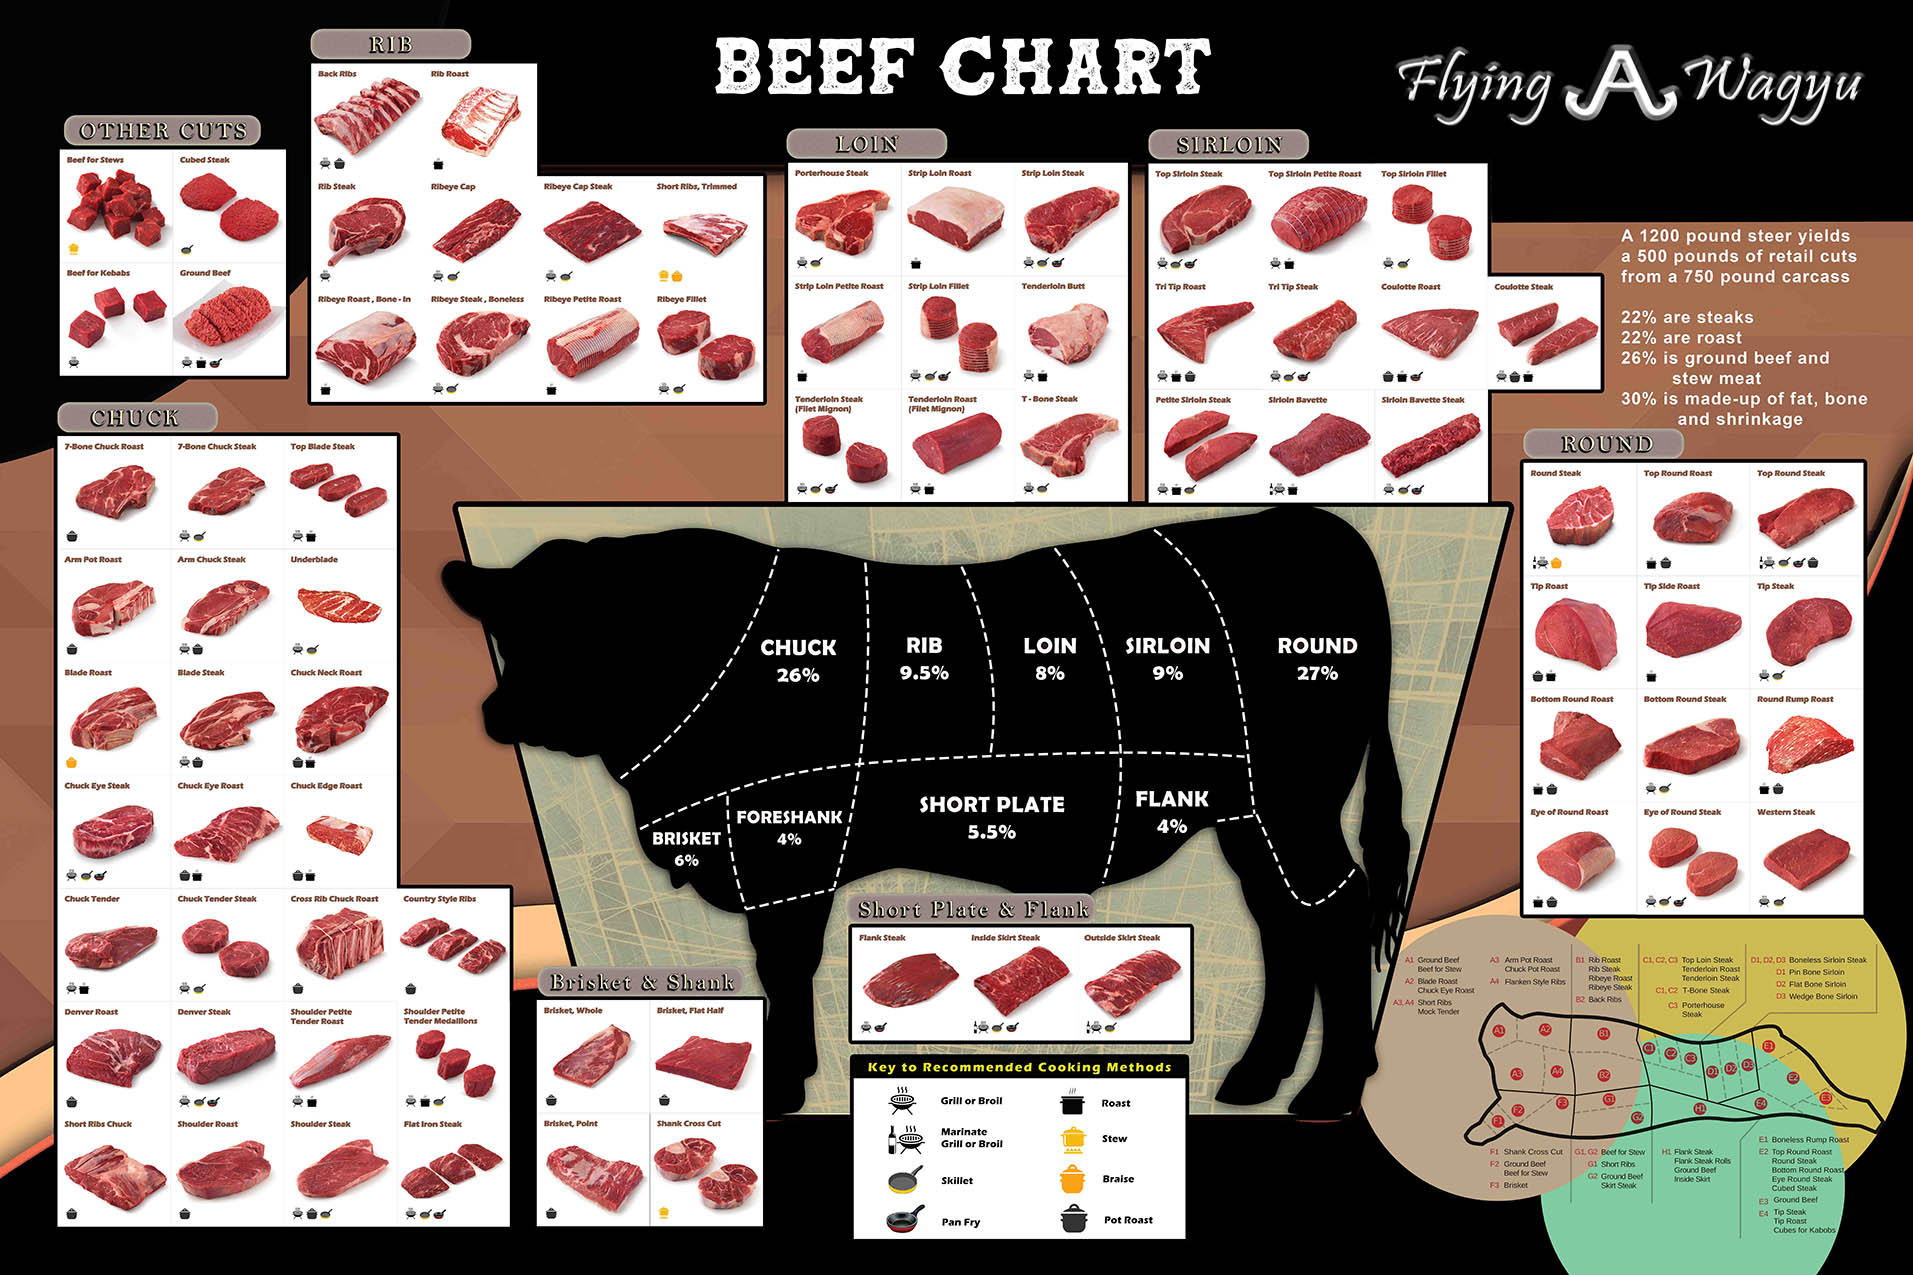 A helpful Beef Chart from Flying A Wagyu